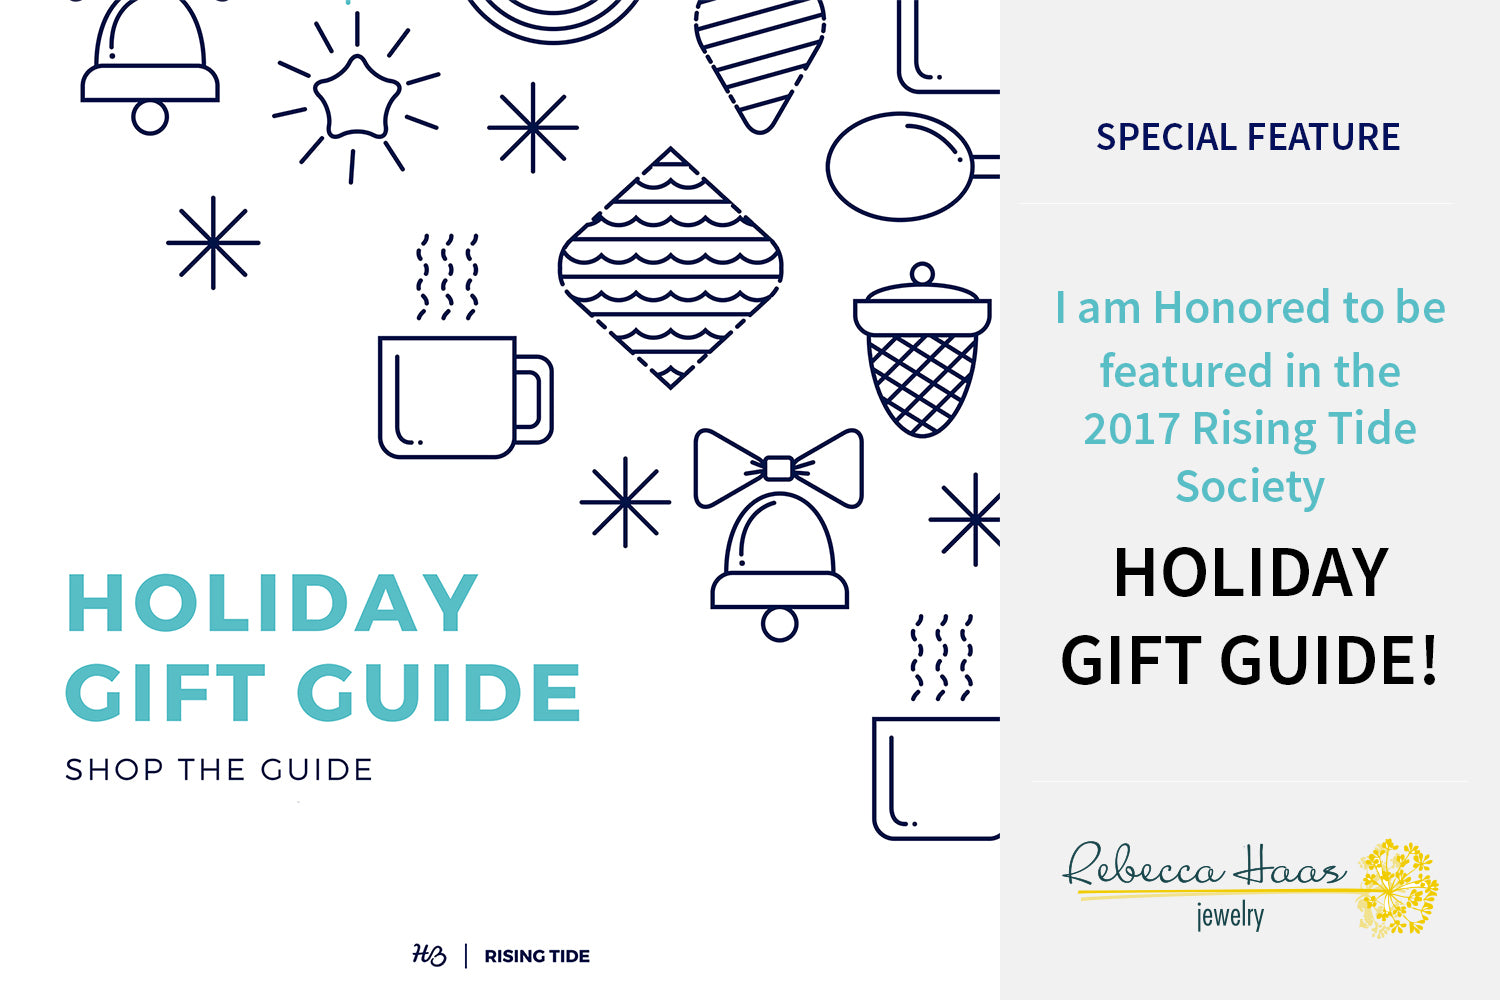 Rebecca Haas Jewelry Selected For The 2017 Rising Tide Holiday Gift Guide!